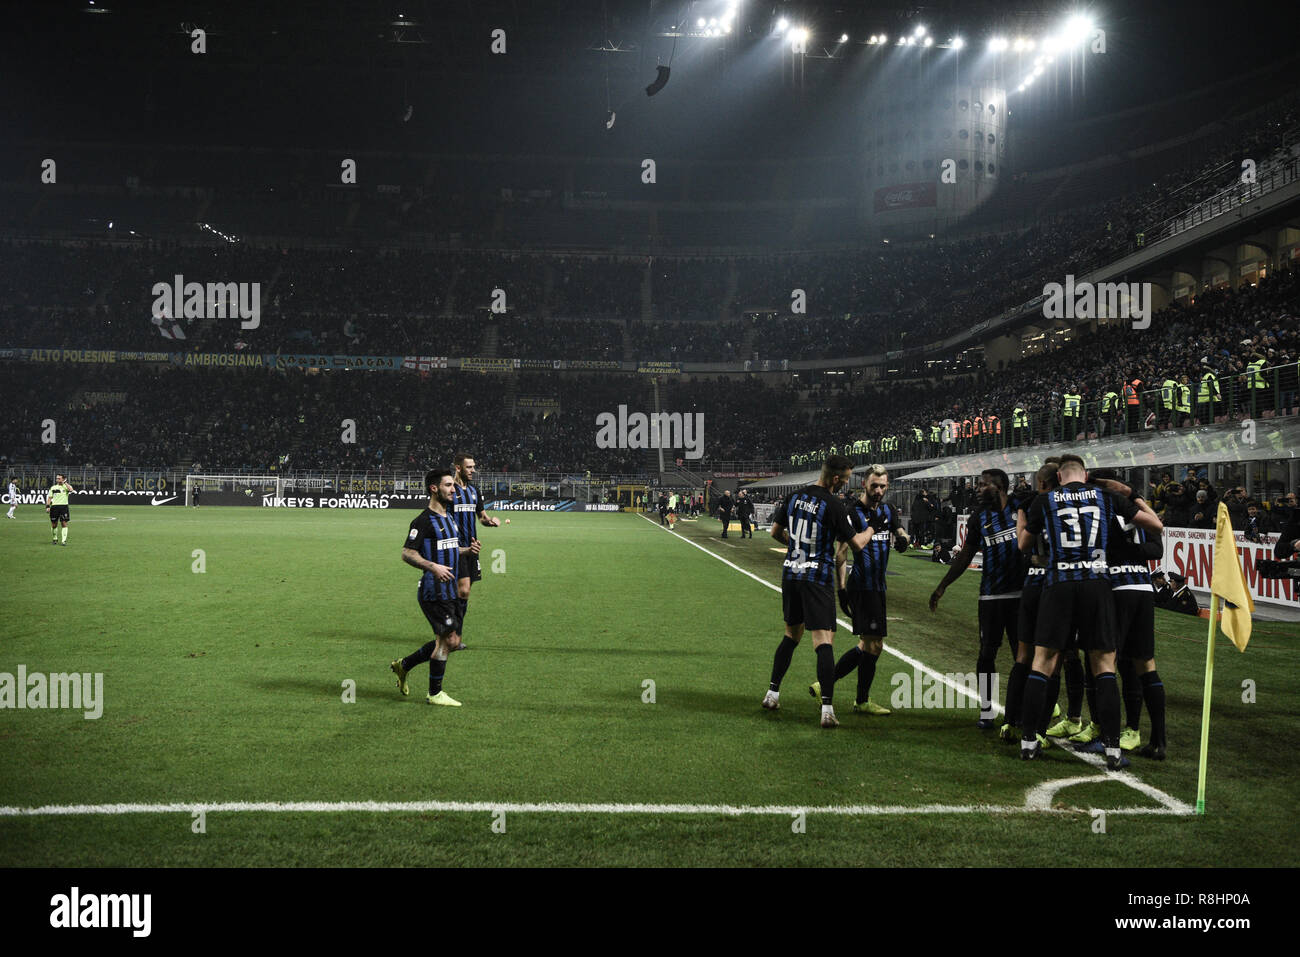 Milan, Italy. 15th Dec 2018. Forward Mauro Icardi (Inter) celebrates with team mates after scoring a goal during the Serie A football match, Inter Milan vs Udinese Calcio at San Siro Meazza Stadium in Milan, Italy on 15 December 2018 Credit: Piero Cruciatti/Alamy Live News Stock Photo